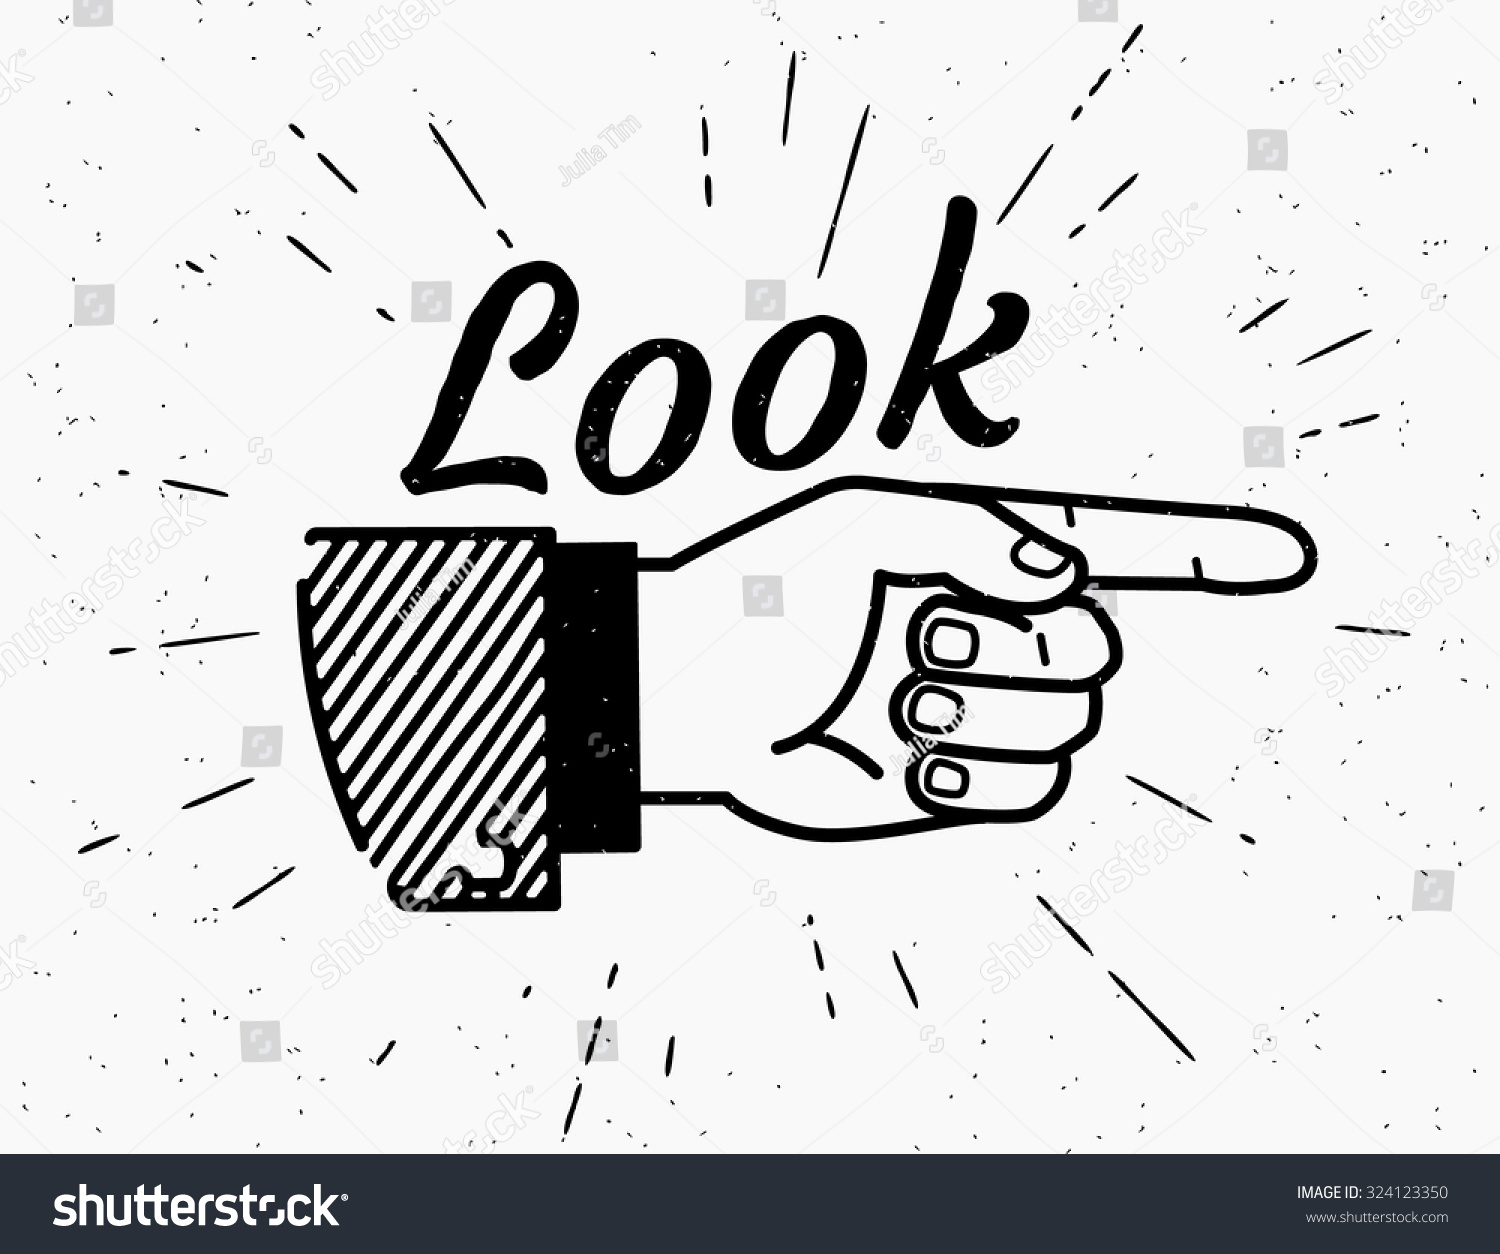 Human Vintage Hand Drawing Pointing Finger Stock Vector (Royalty Free